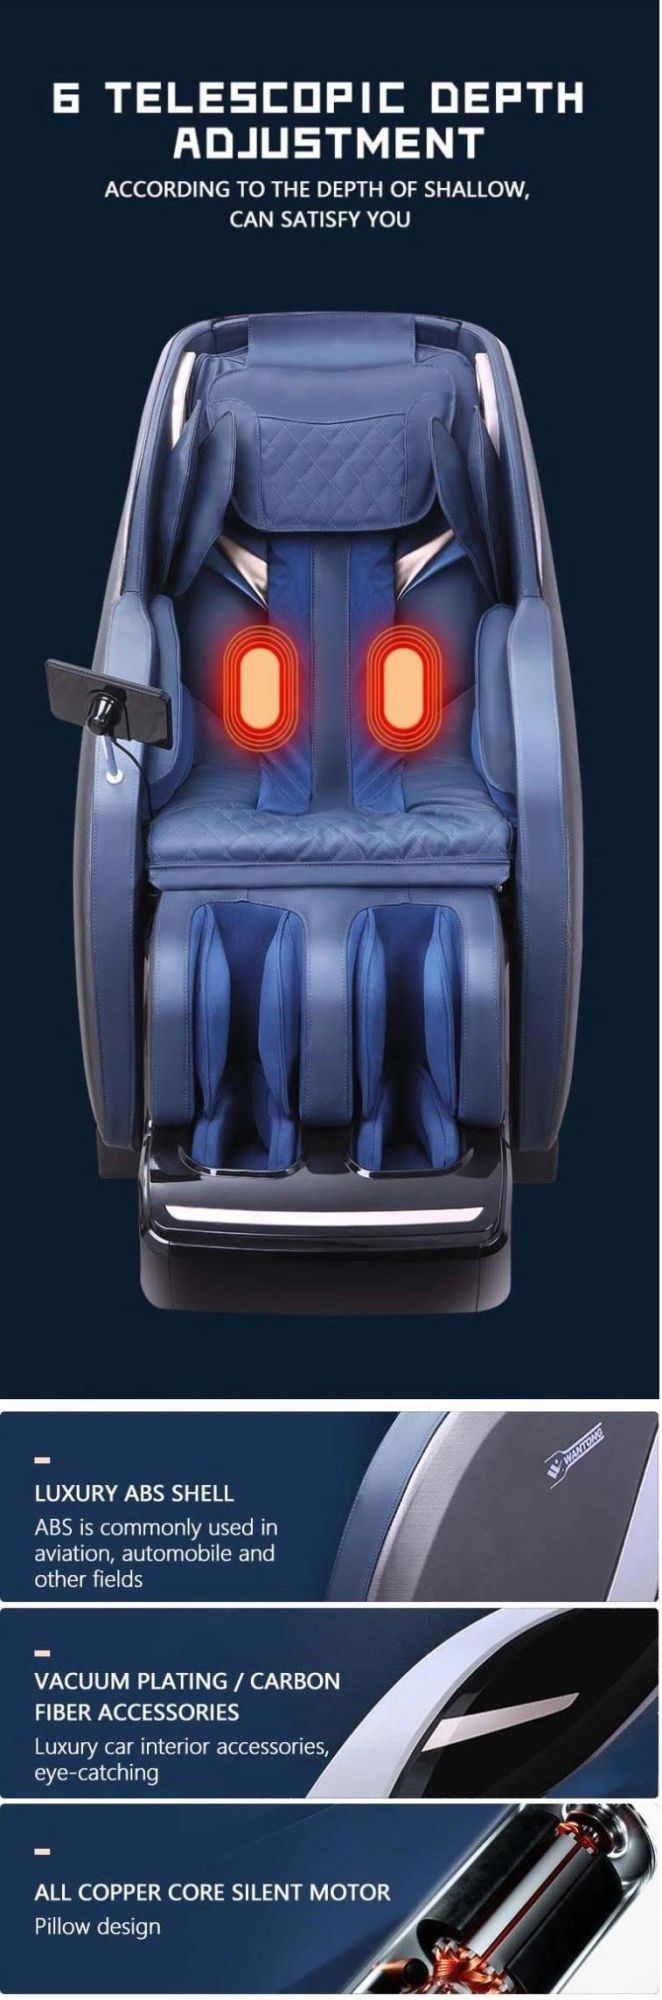 Display LCD Remote Control Luxury 4D Foot SPA Factory Price Kneading Shiatsu Blue-Tooth Full Body Massage Chair